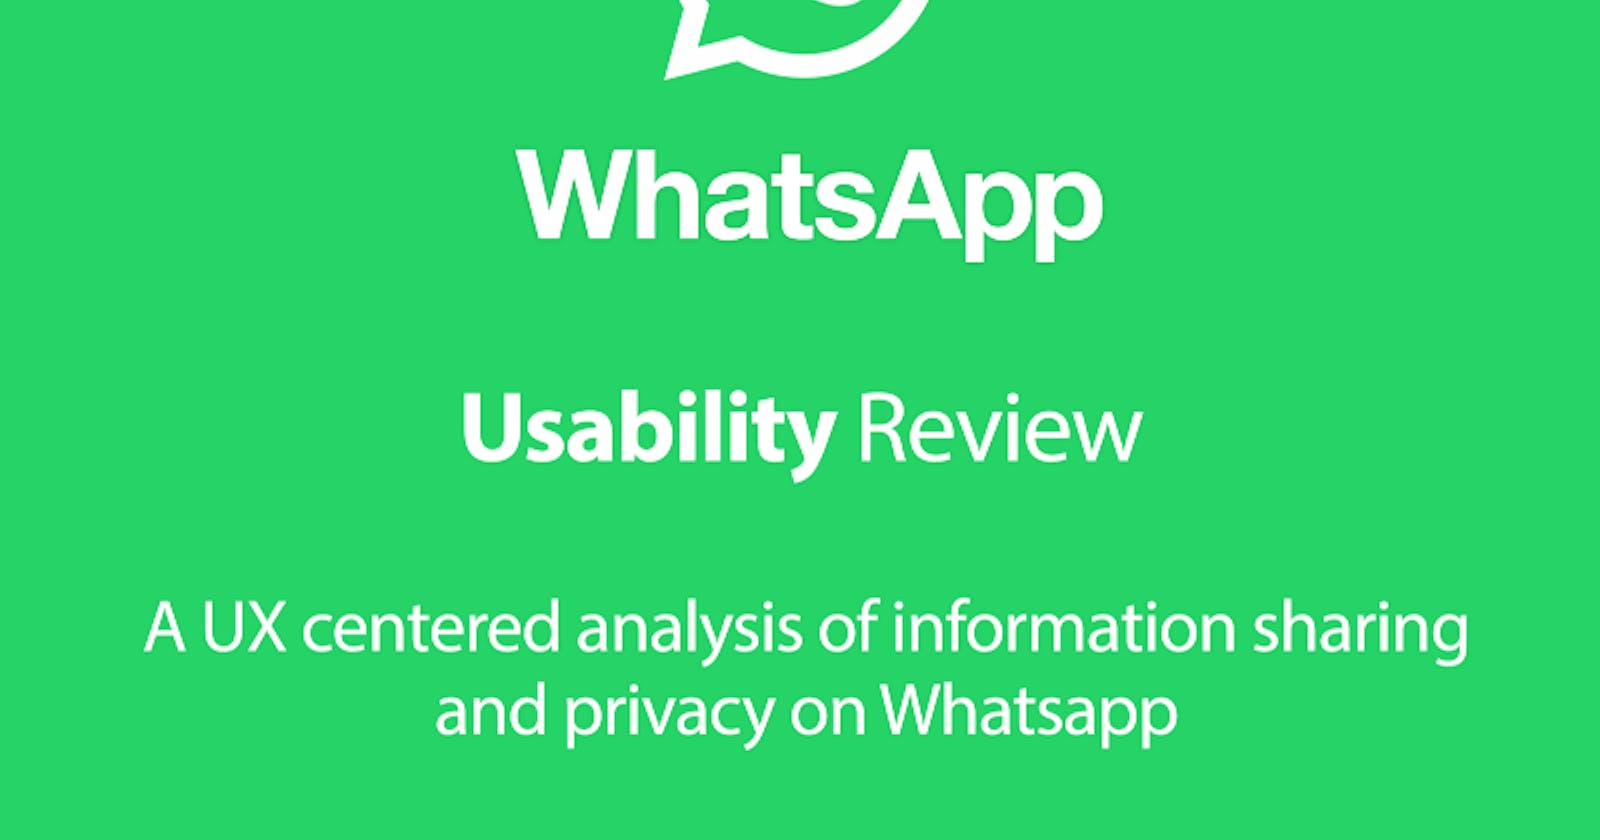 Case study: A UX-centered analysis of information sharing and privacy over WhatsApp